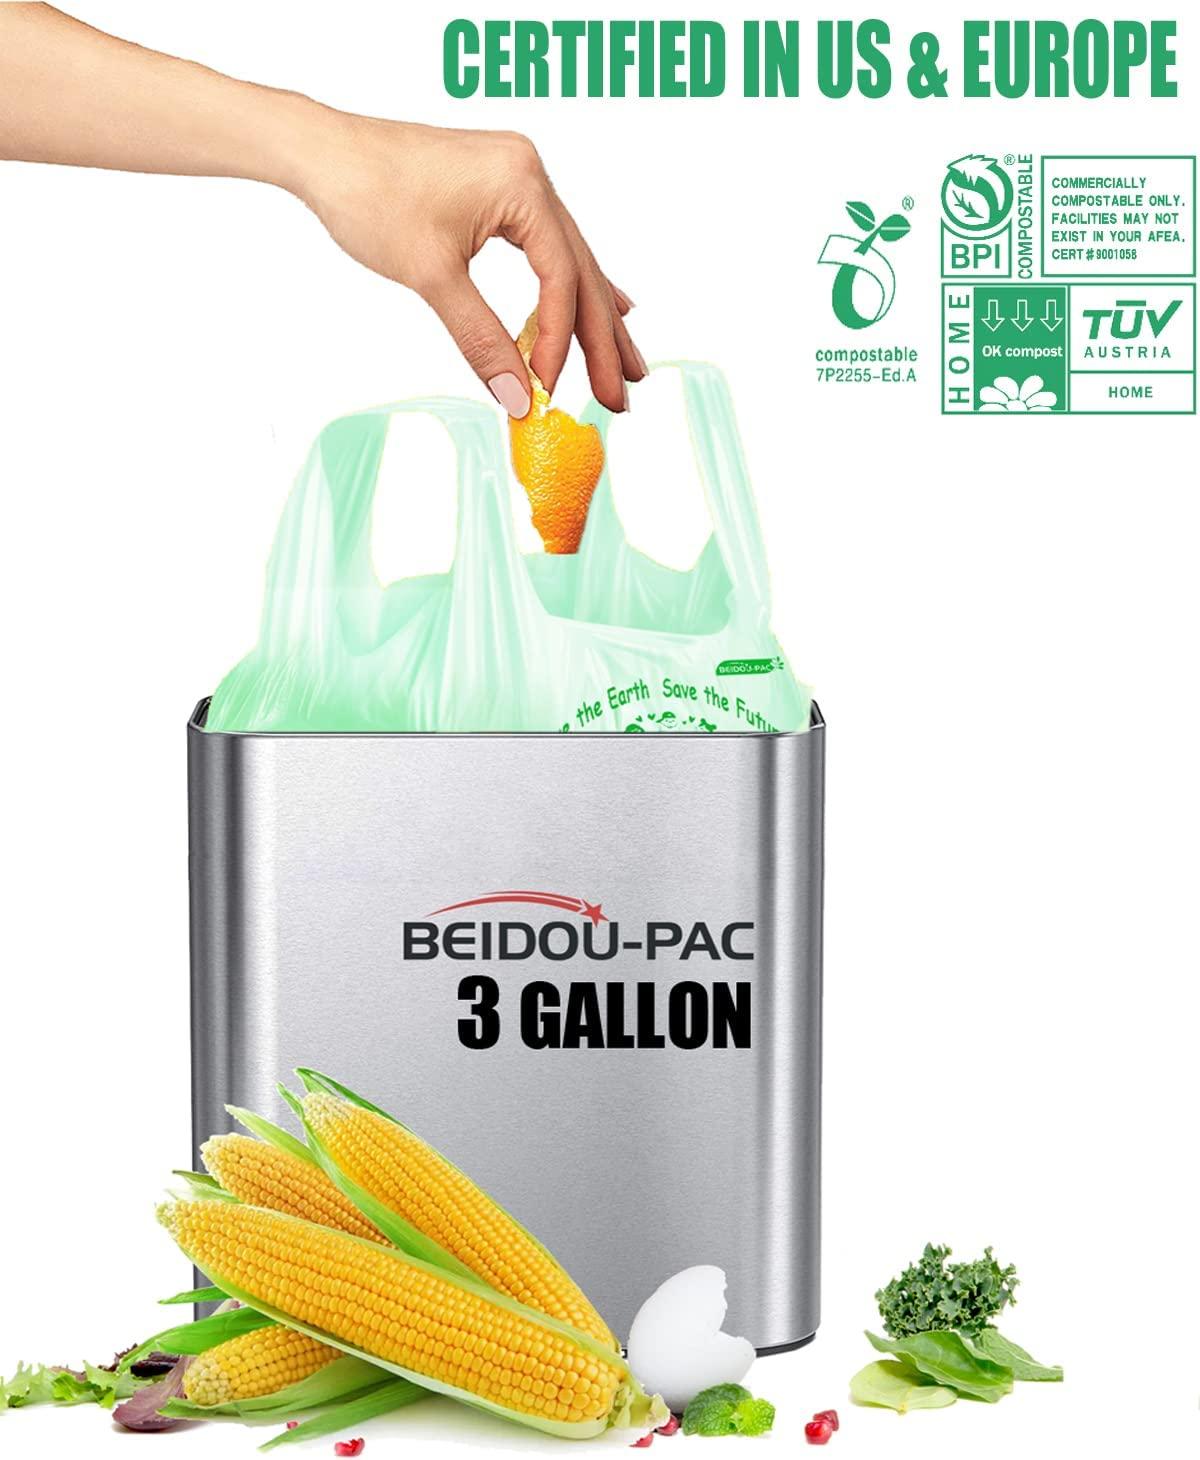 Biodegradable Garbage Bags & Non-Biodegradable Garbage Bags